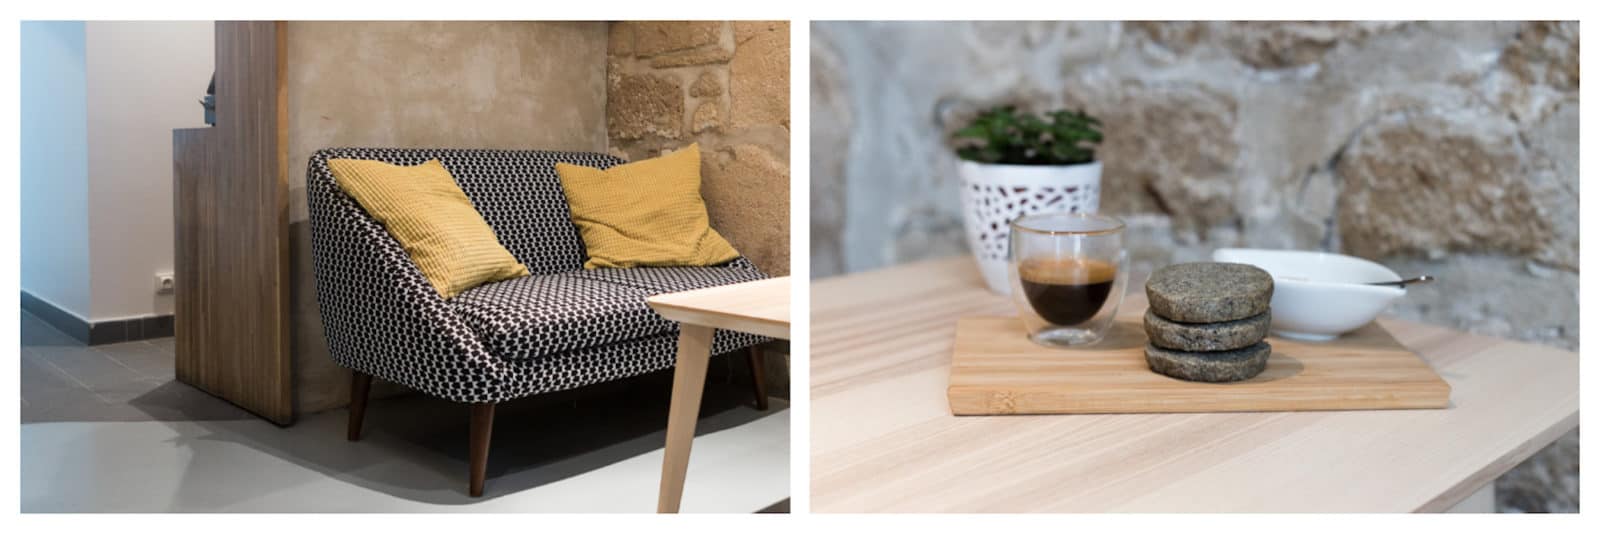 HOPE restaurant in the Marais serves delicious veggie burgers with a side of soothing Scandinavian style interiors with couches upholstered in natural fibres (left). Coffee laid out on a smooth wooden table (right).